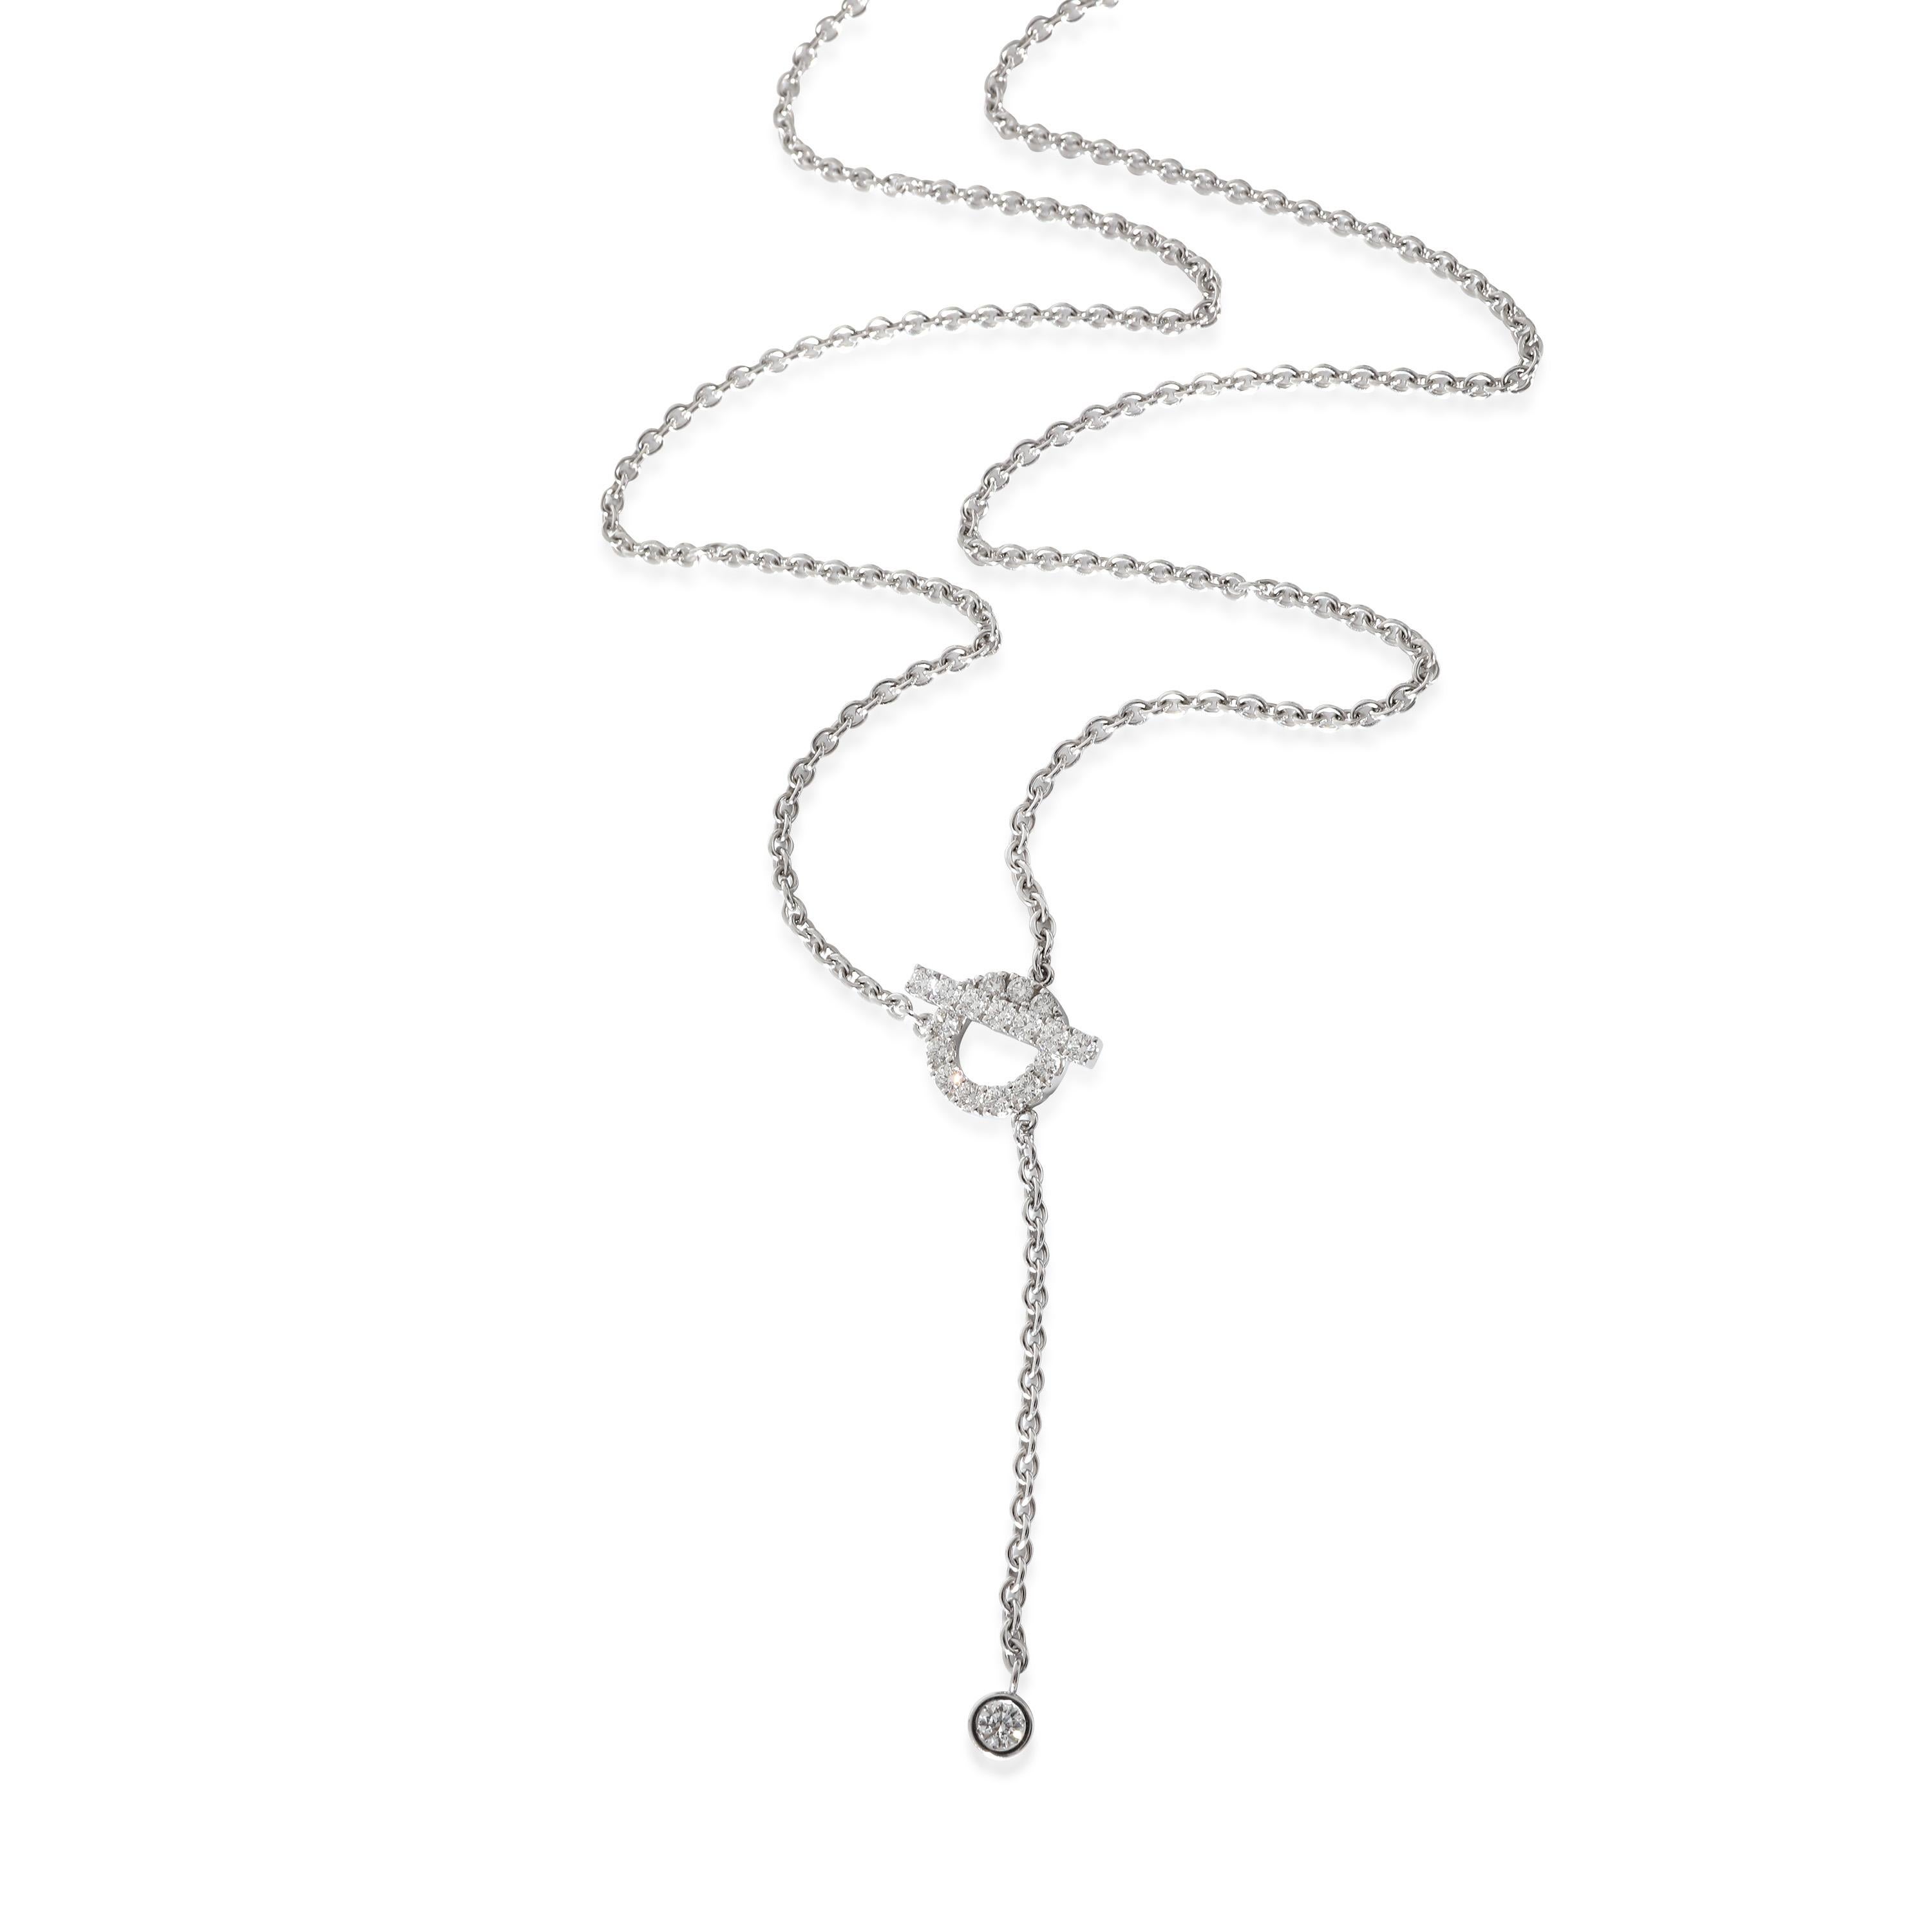 Hermès Finesse Fashion Necklace in 18k White Gold 0.55 CTW

PRIMARY DETAILS
SKU: 133700
Listing Title: Hermès Finesse Fashion Necklace in 18k White Gold 0.55 CTW
Condition Description: Retails for 7950 USD. In excellent condition. 17 in in length.